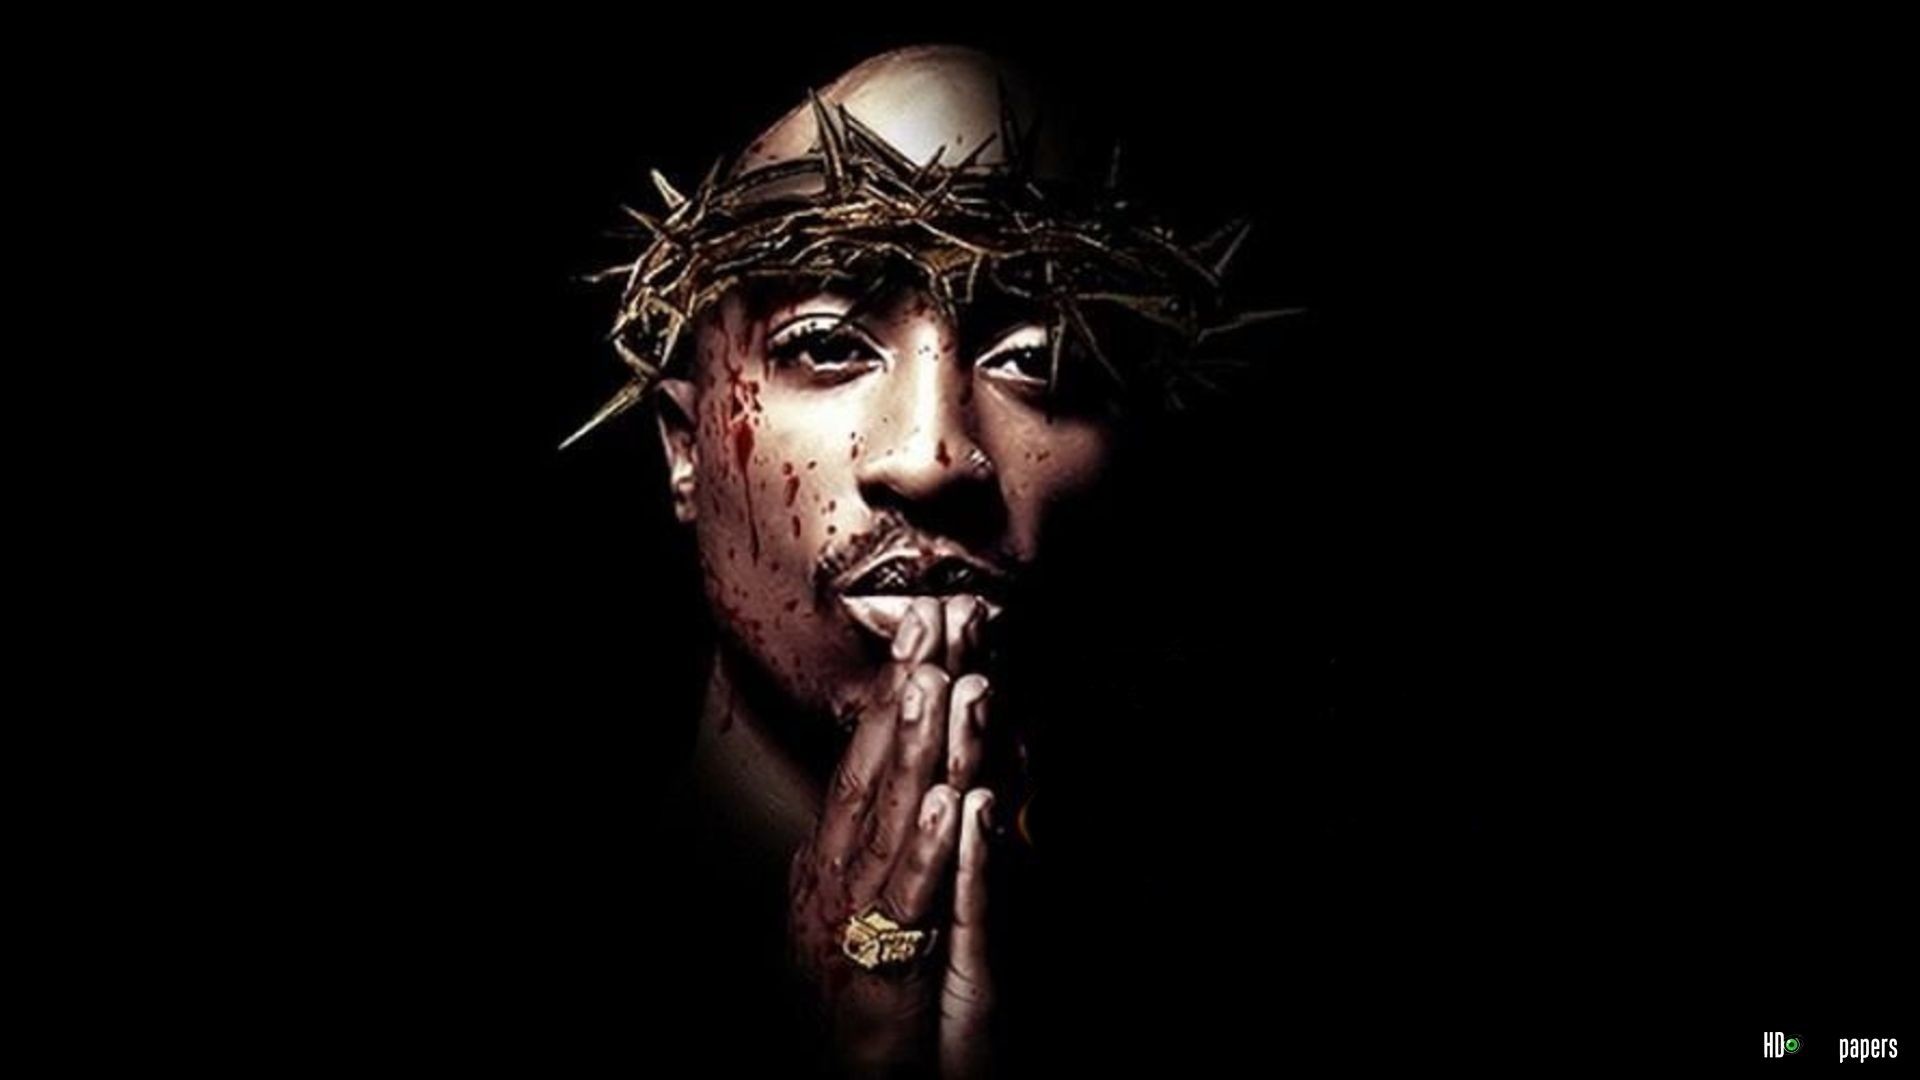 1920x1080 Tupac Black and White Wallpaper free desktop backgrounds and 800Ã600 Tupac  Desktop Wallpapers (